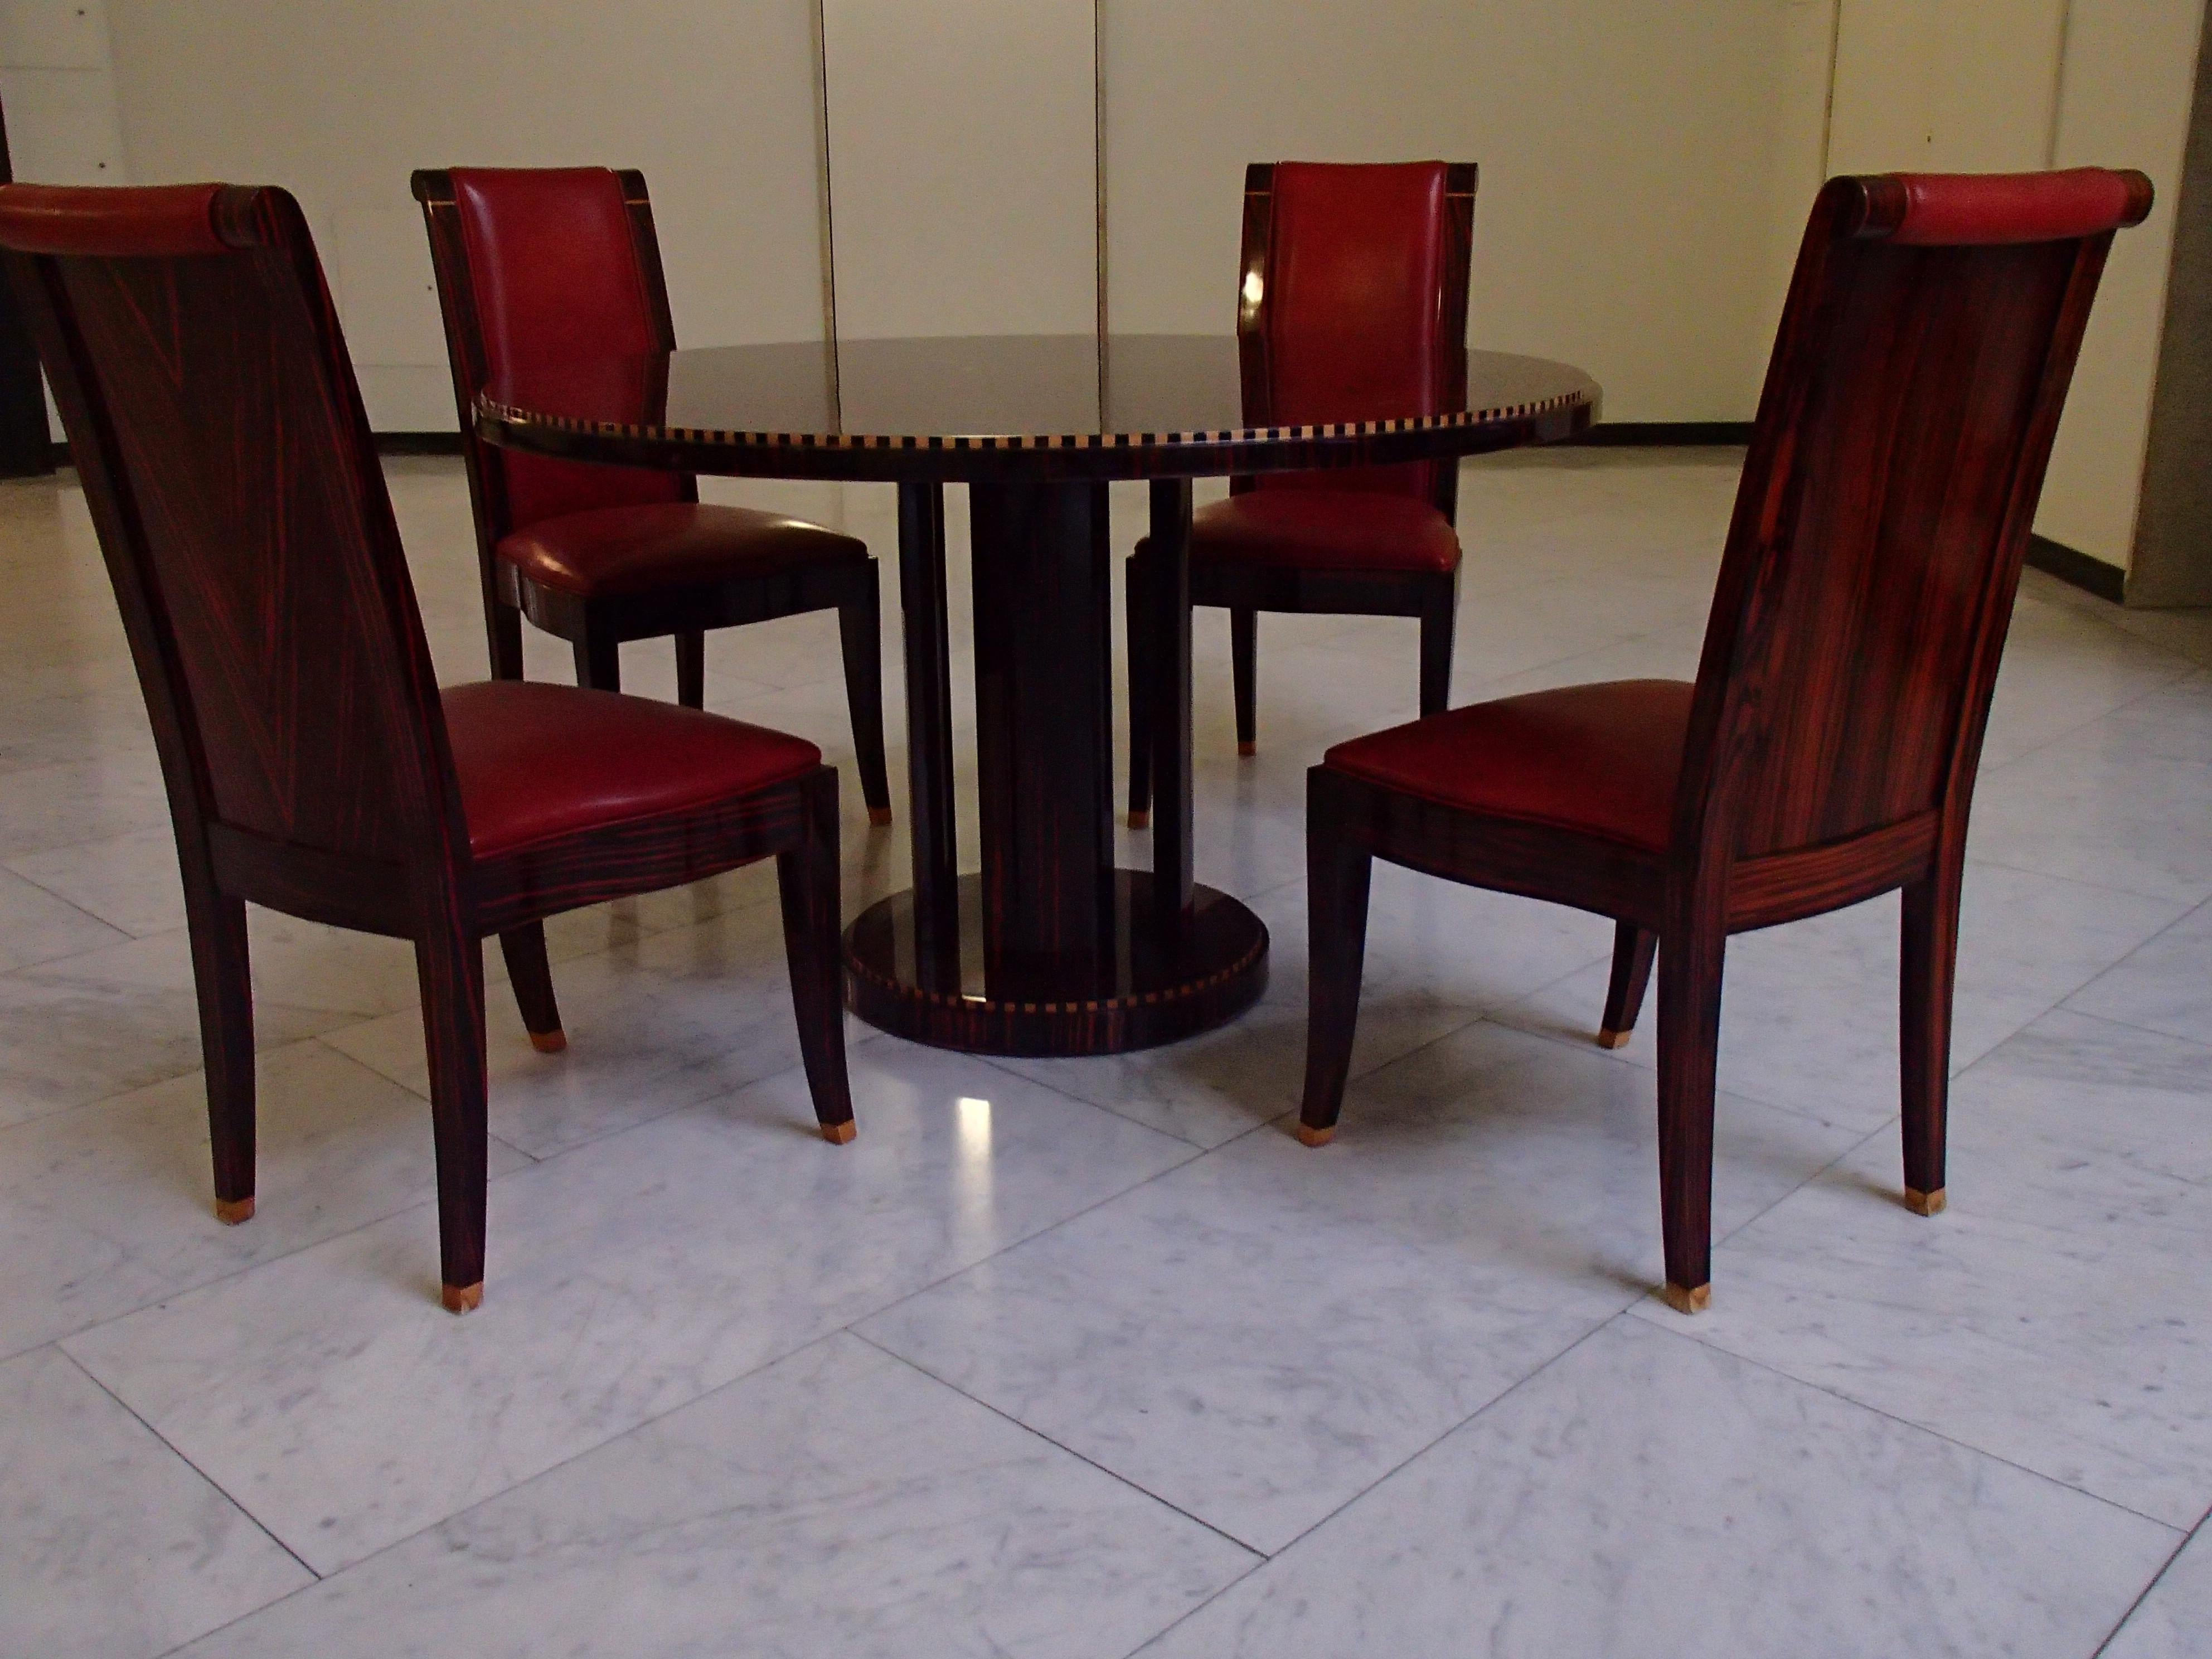 Round Art Deco table with 4 red leather chairs newer production with signs of wear around the table. The top is in good condition. The chairs have also some small hits, but the leather is good.